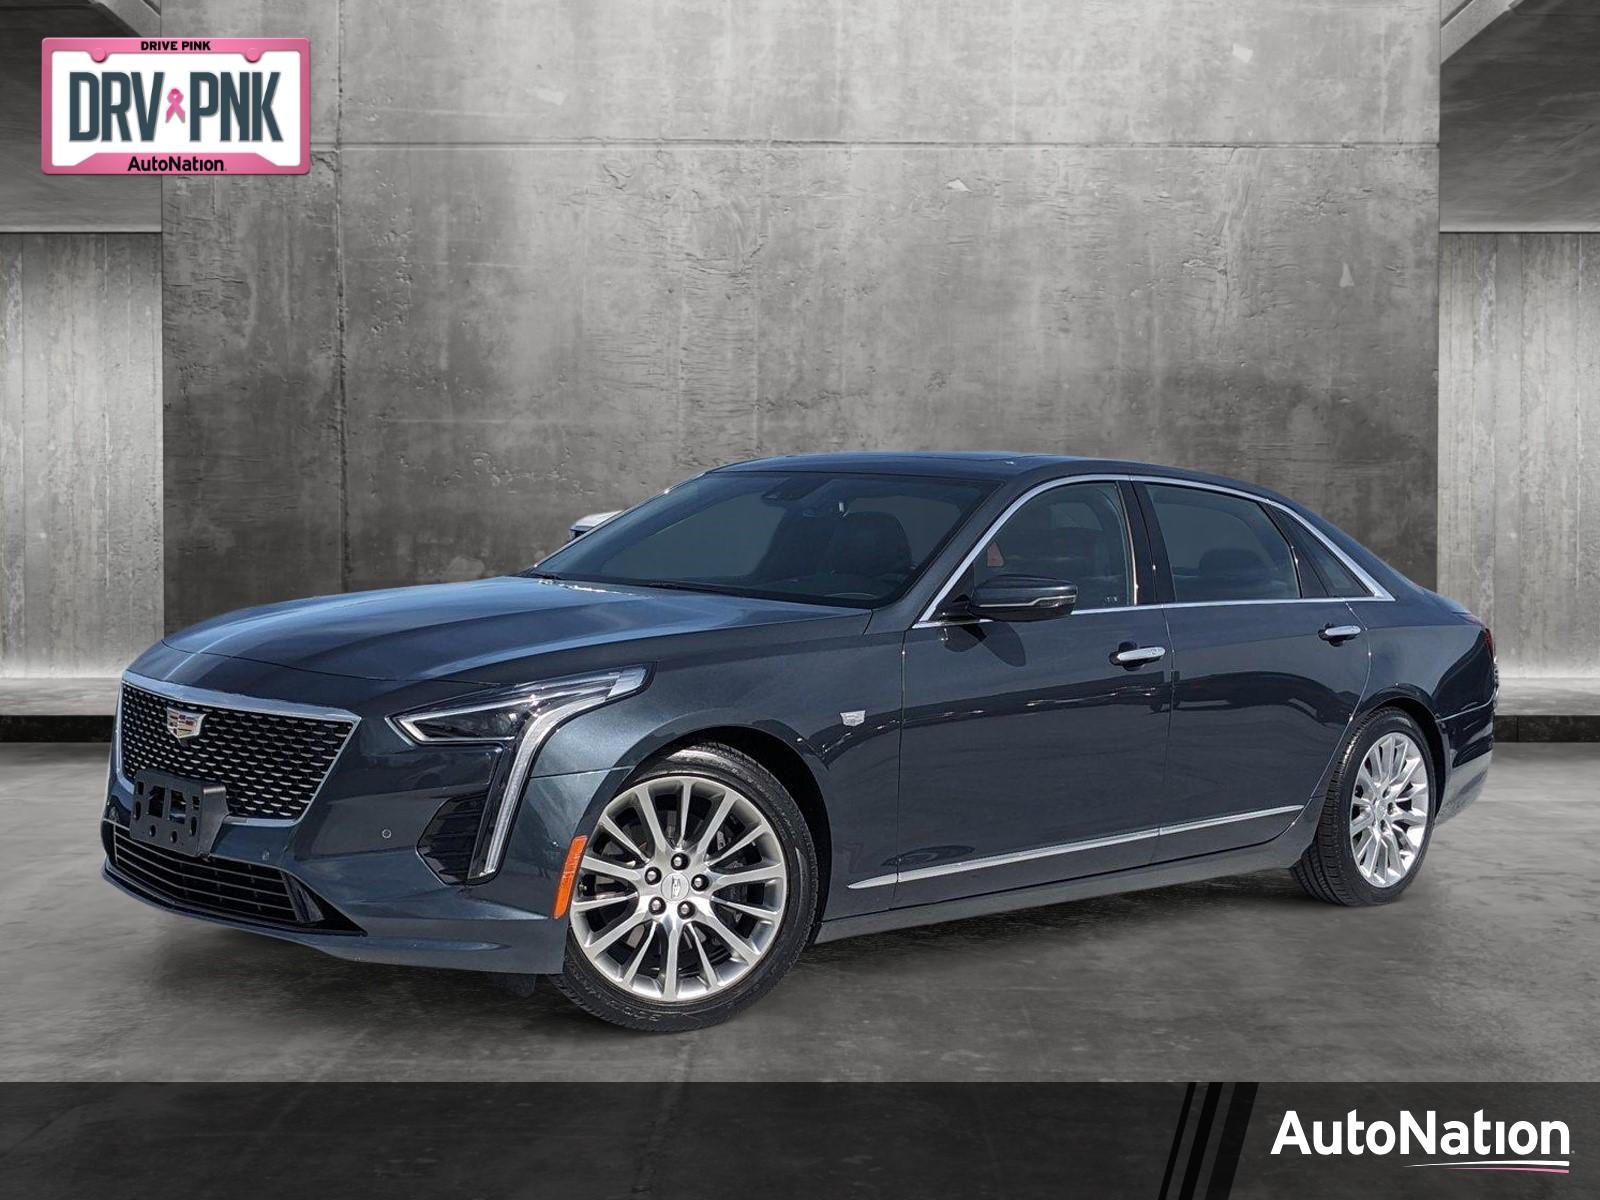 2020 Cadillac CT6 Vehicle Photo in Hollywood, FL 33021